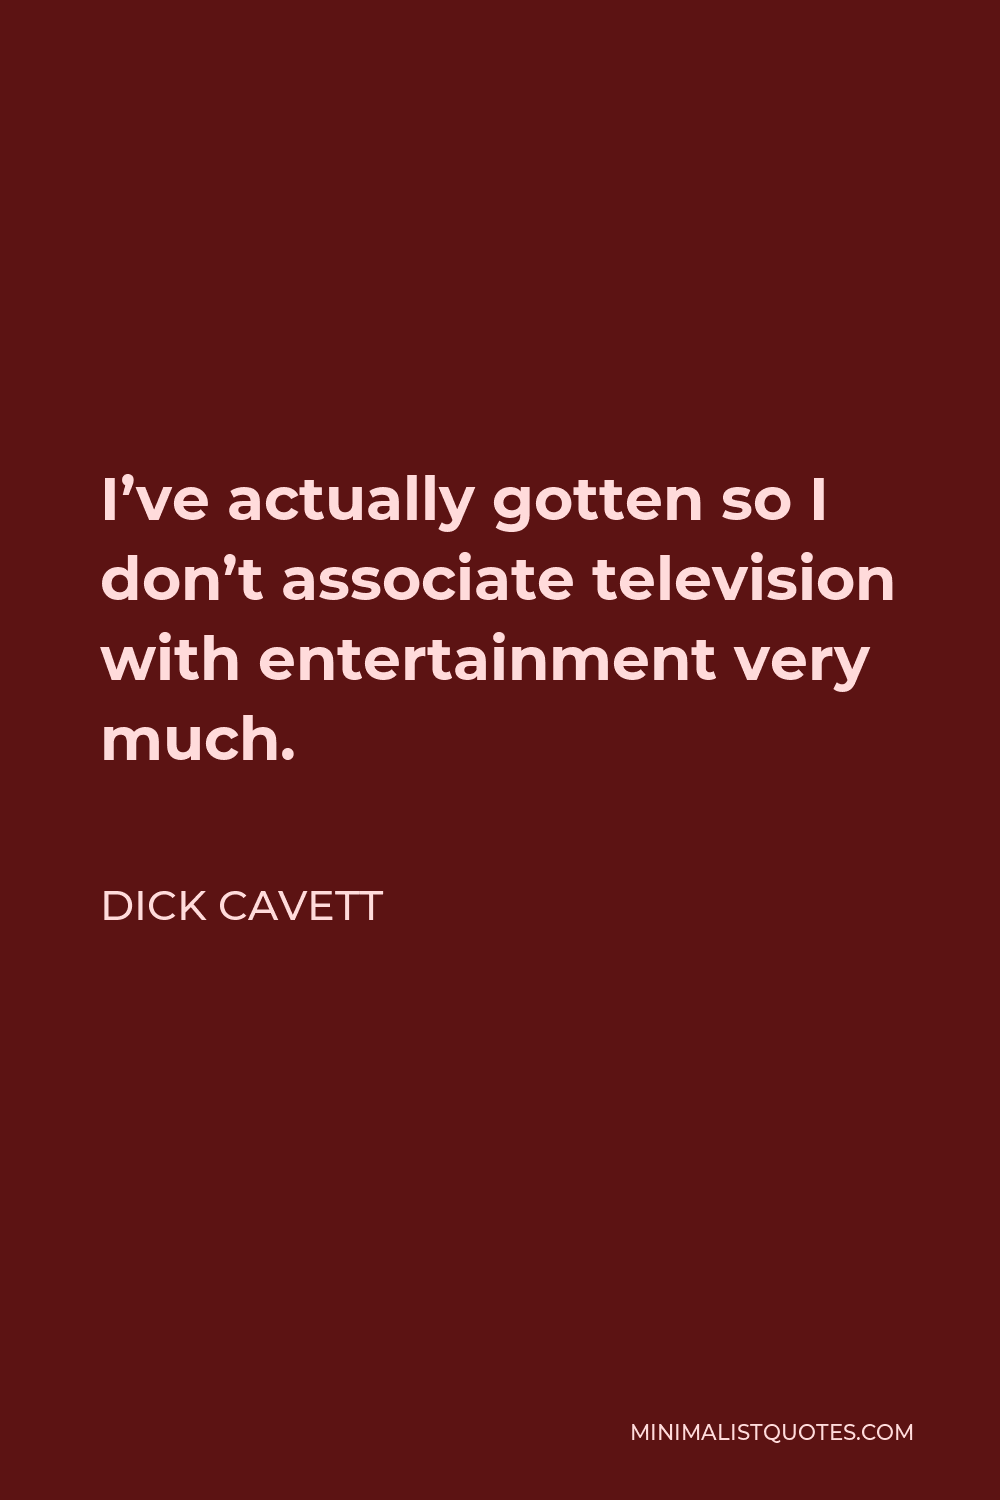 Dick Cavett Quote - I’ve actually gotten so I don’t associate television with entertainment very much.